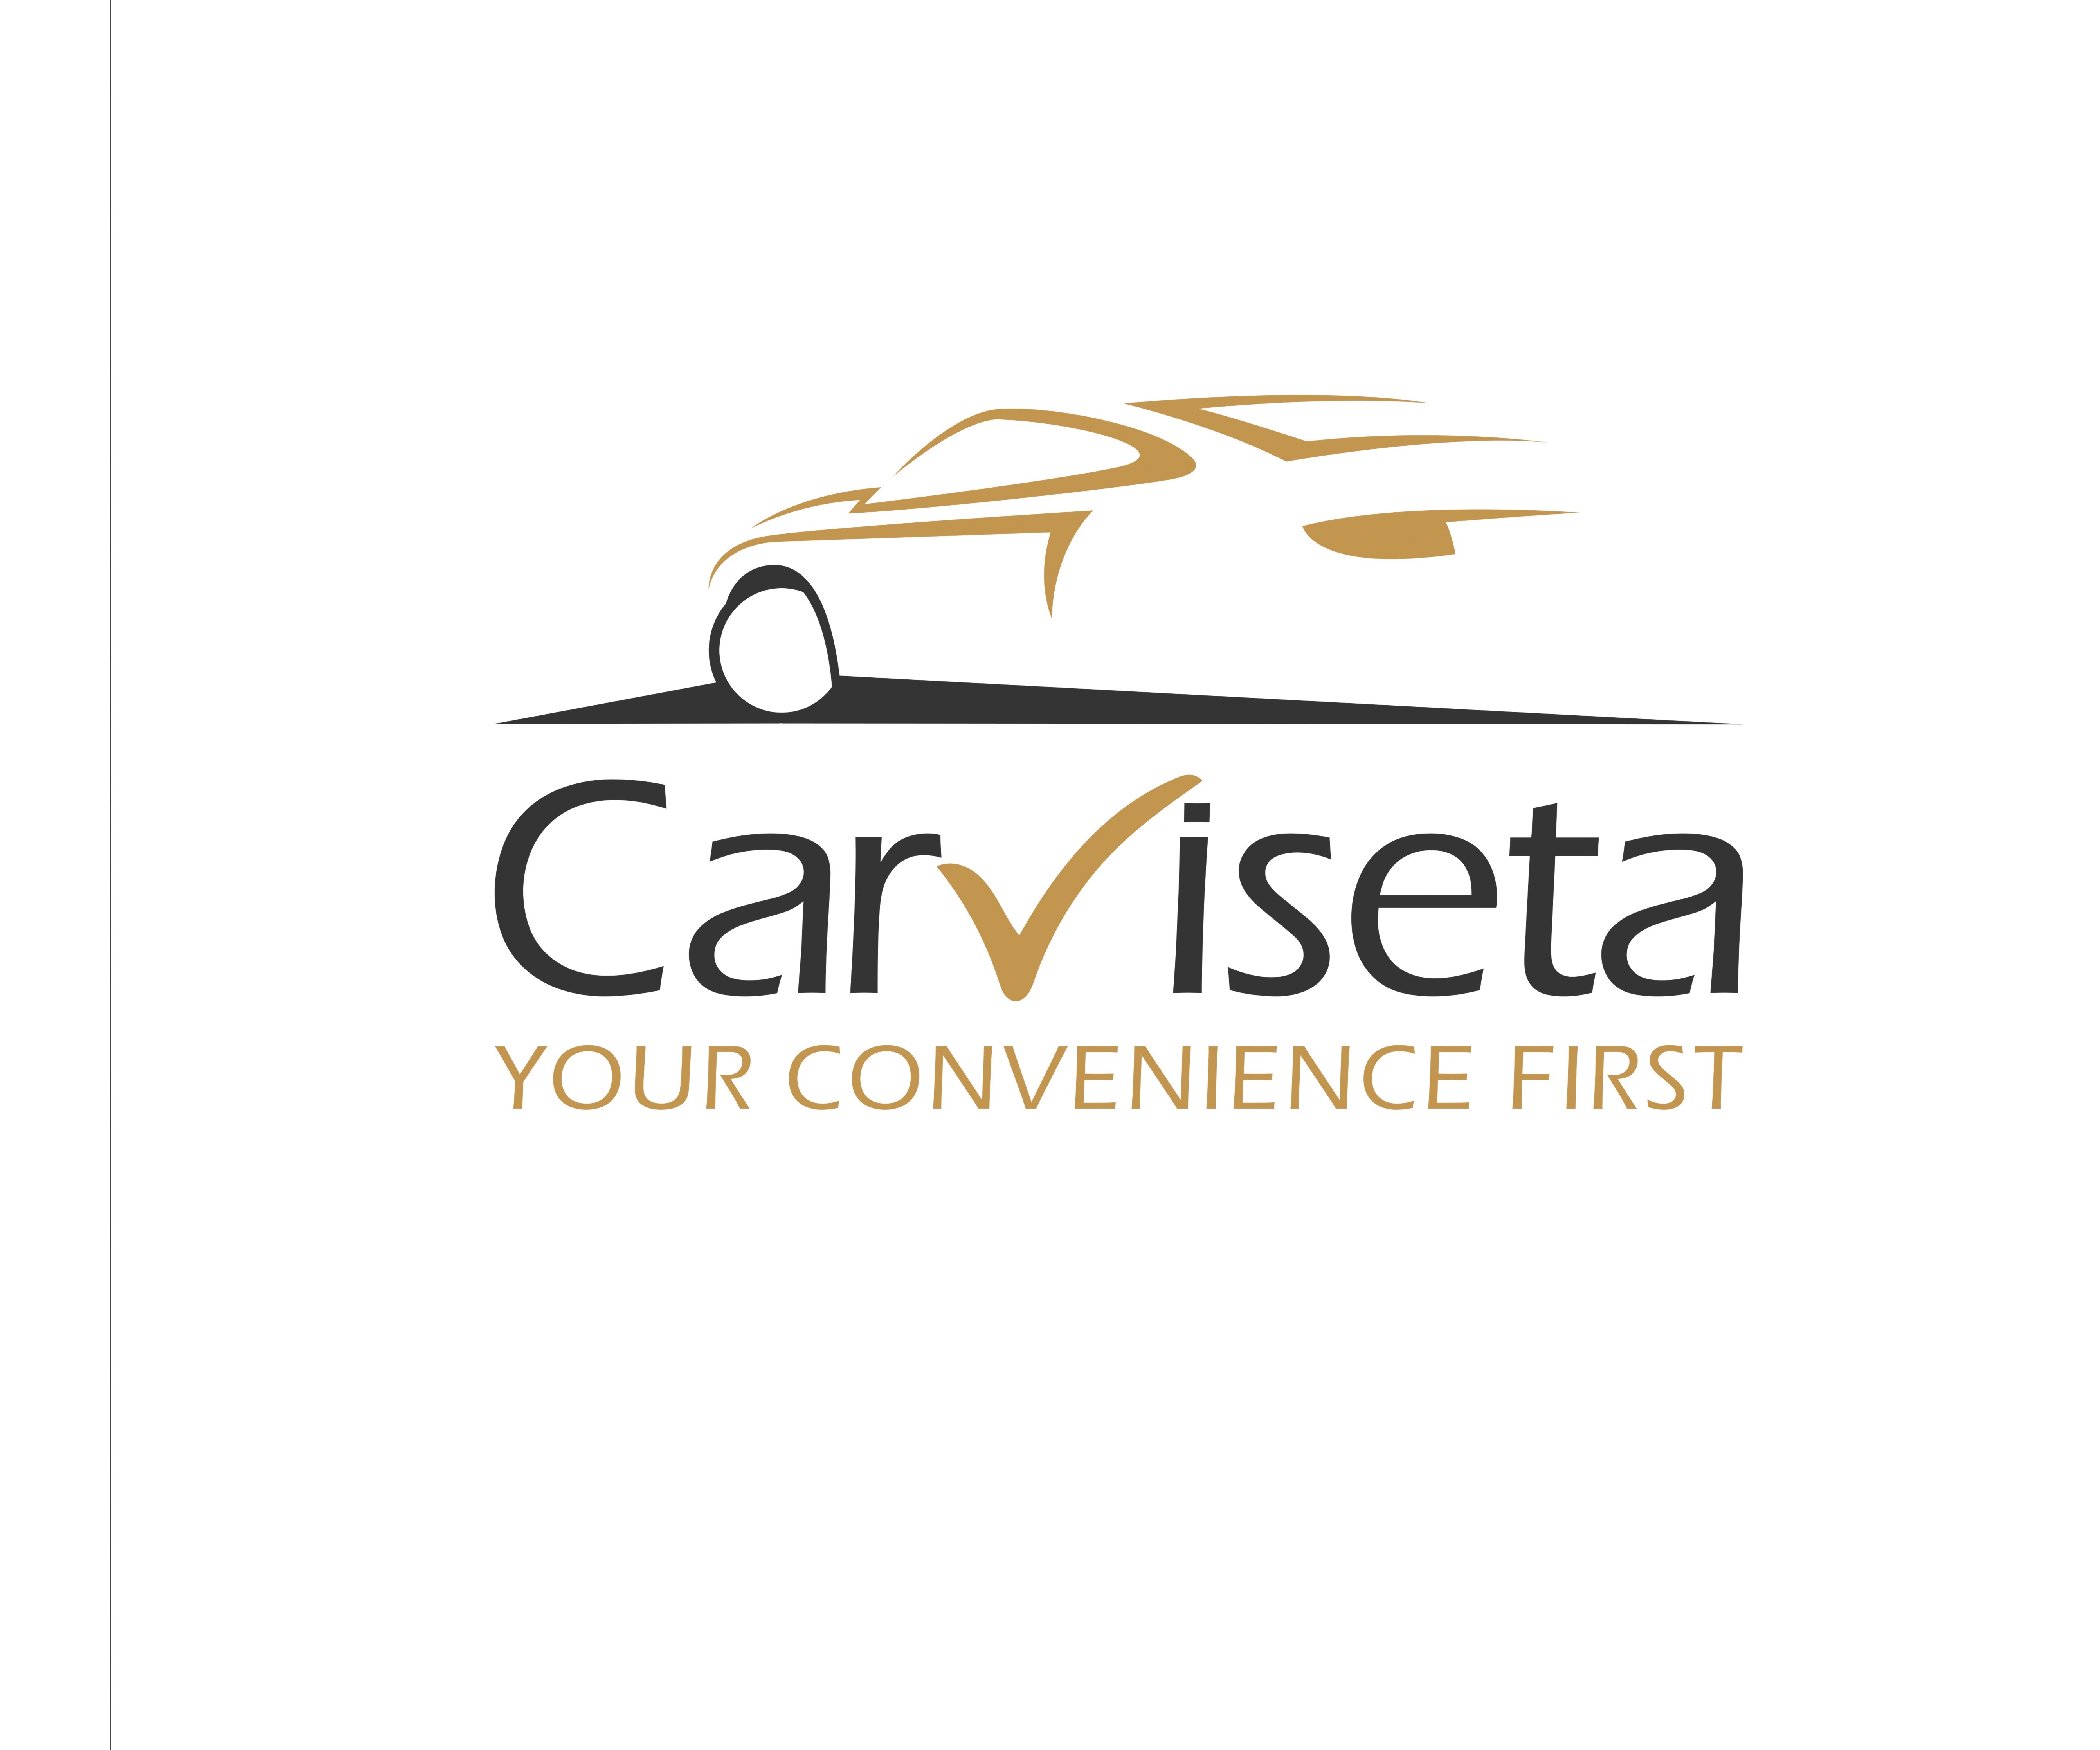 Text: Carviseta. Your convenience first